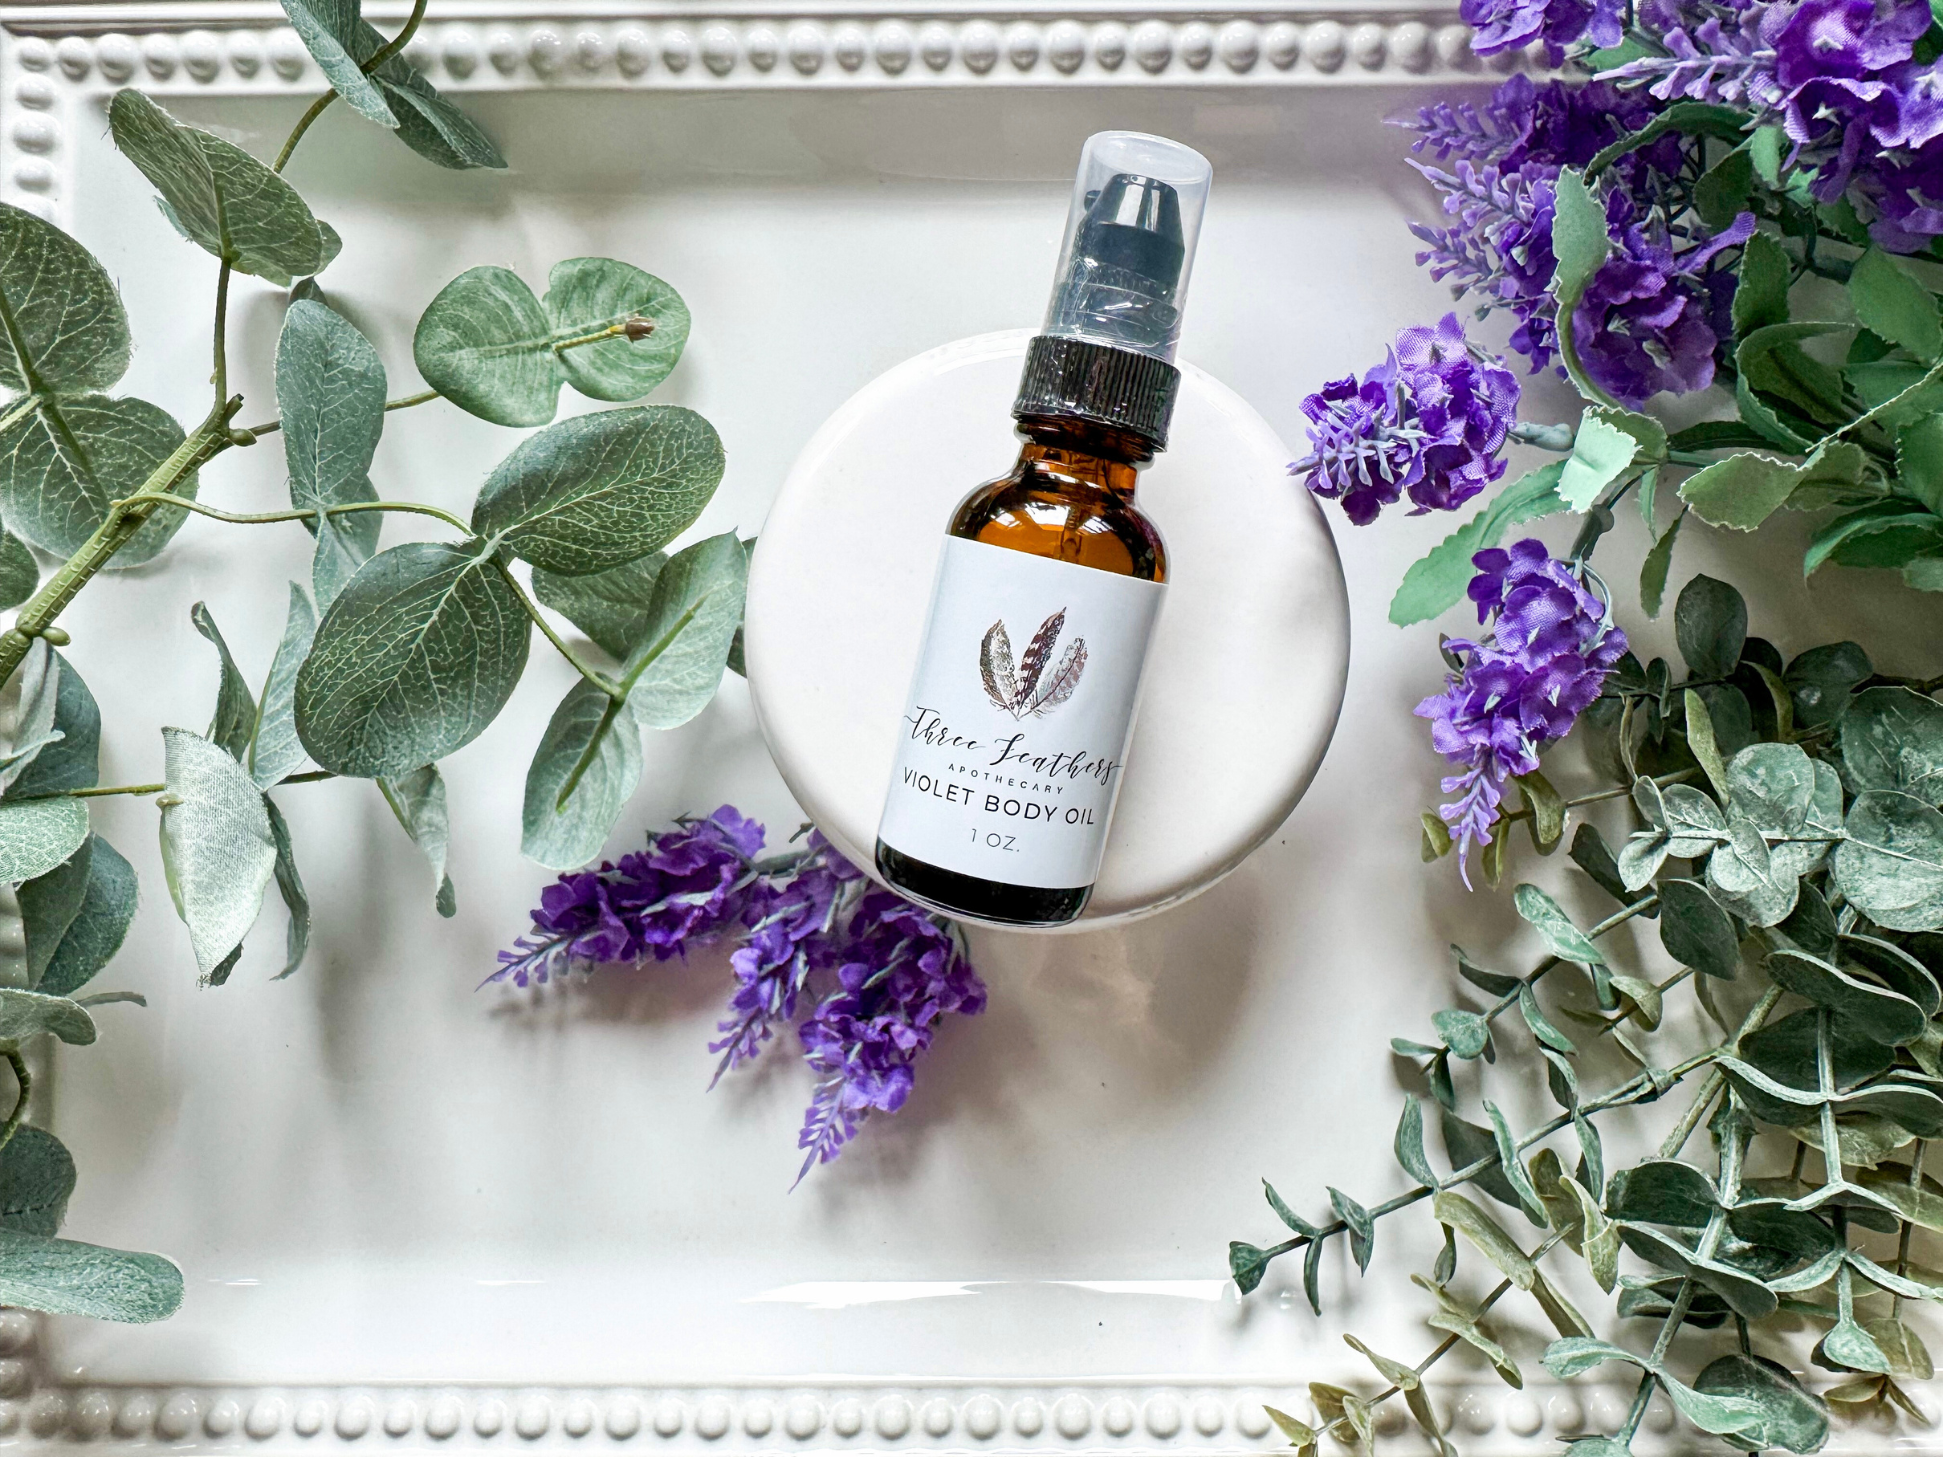 Violet Limited Edition Egyptian Body Oil 1oz|| Three Feathers Apothecary